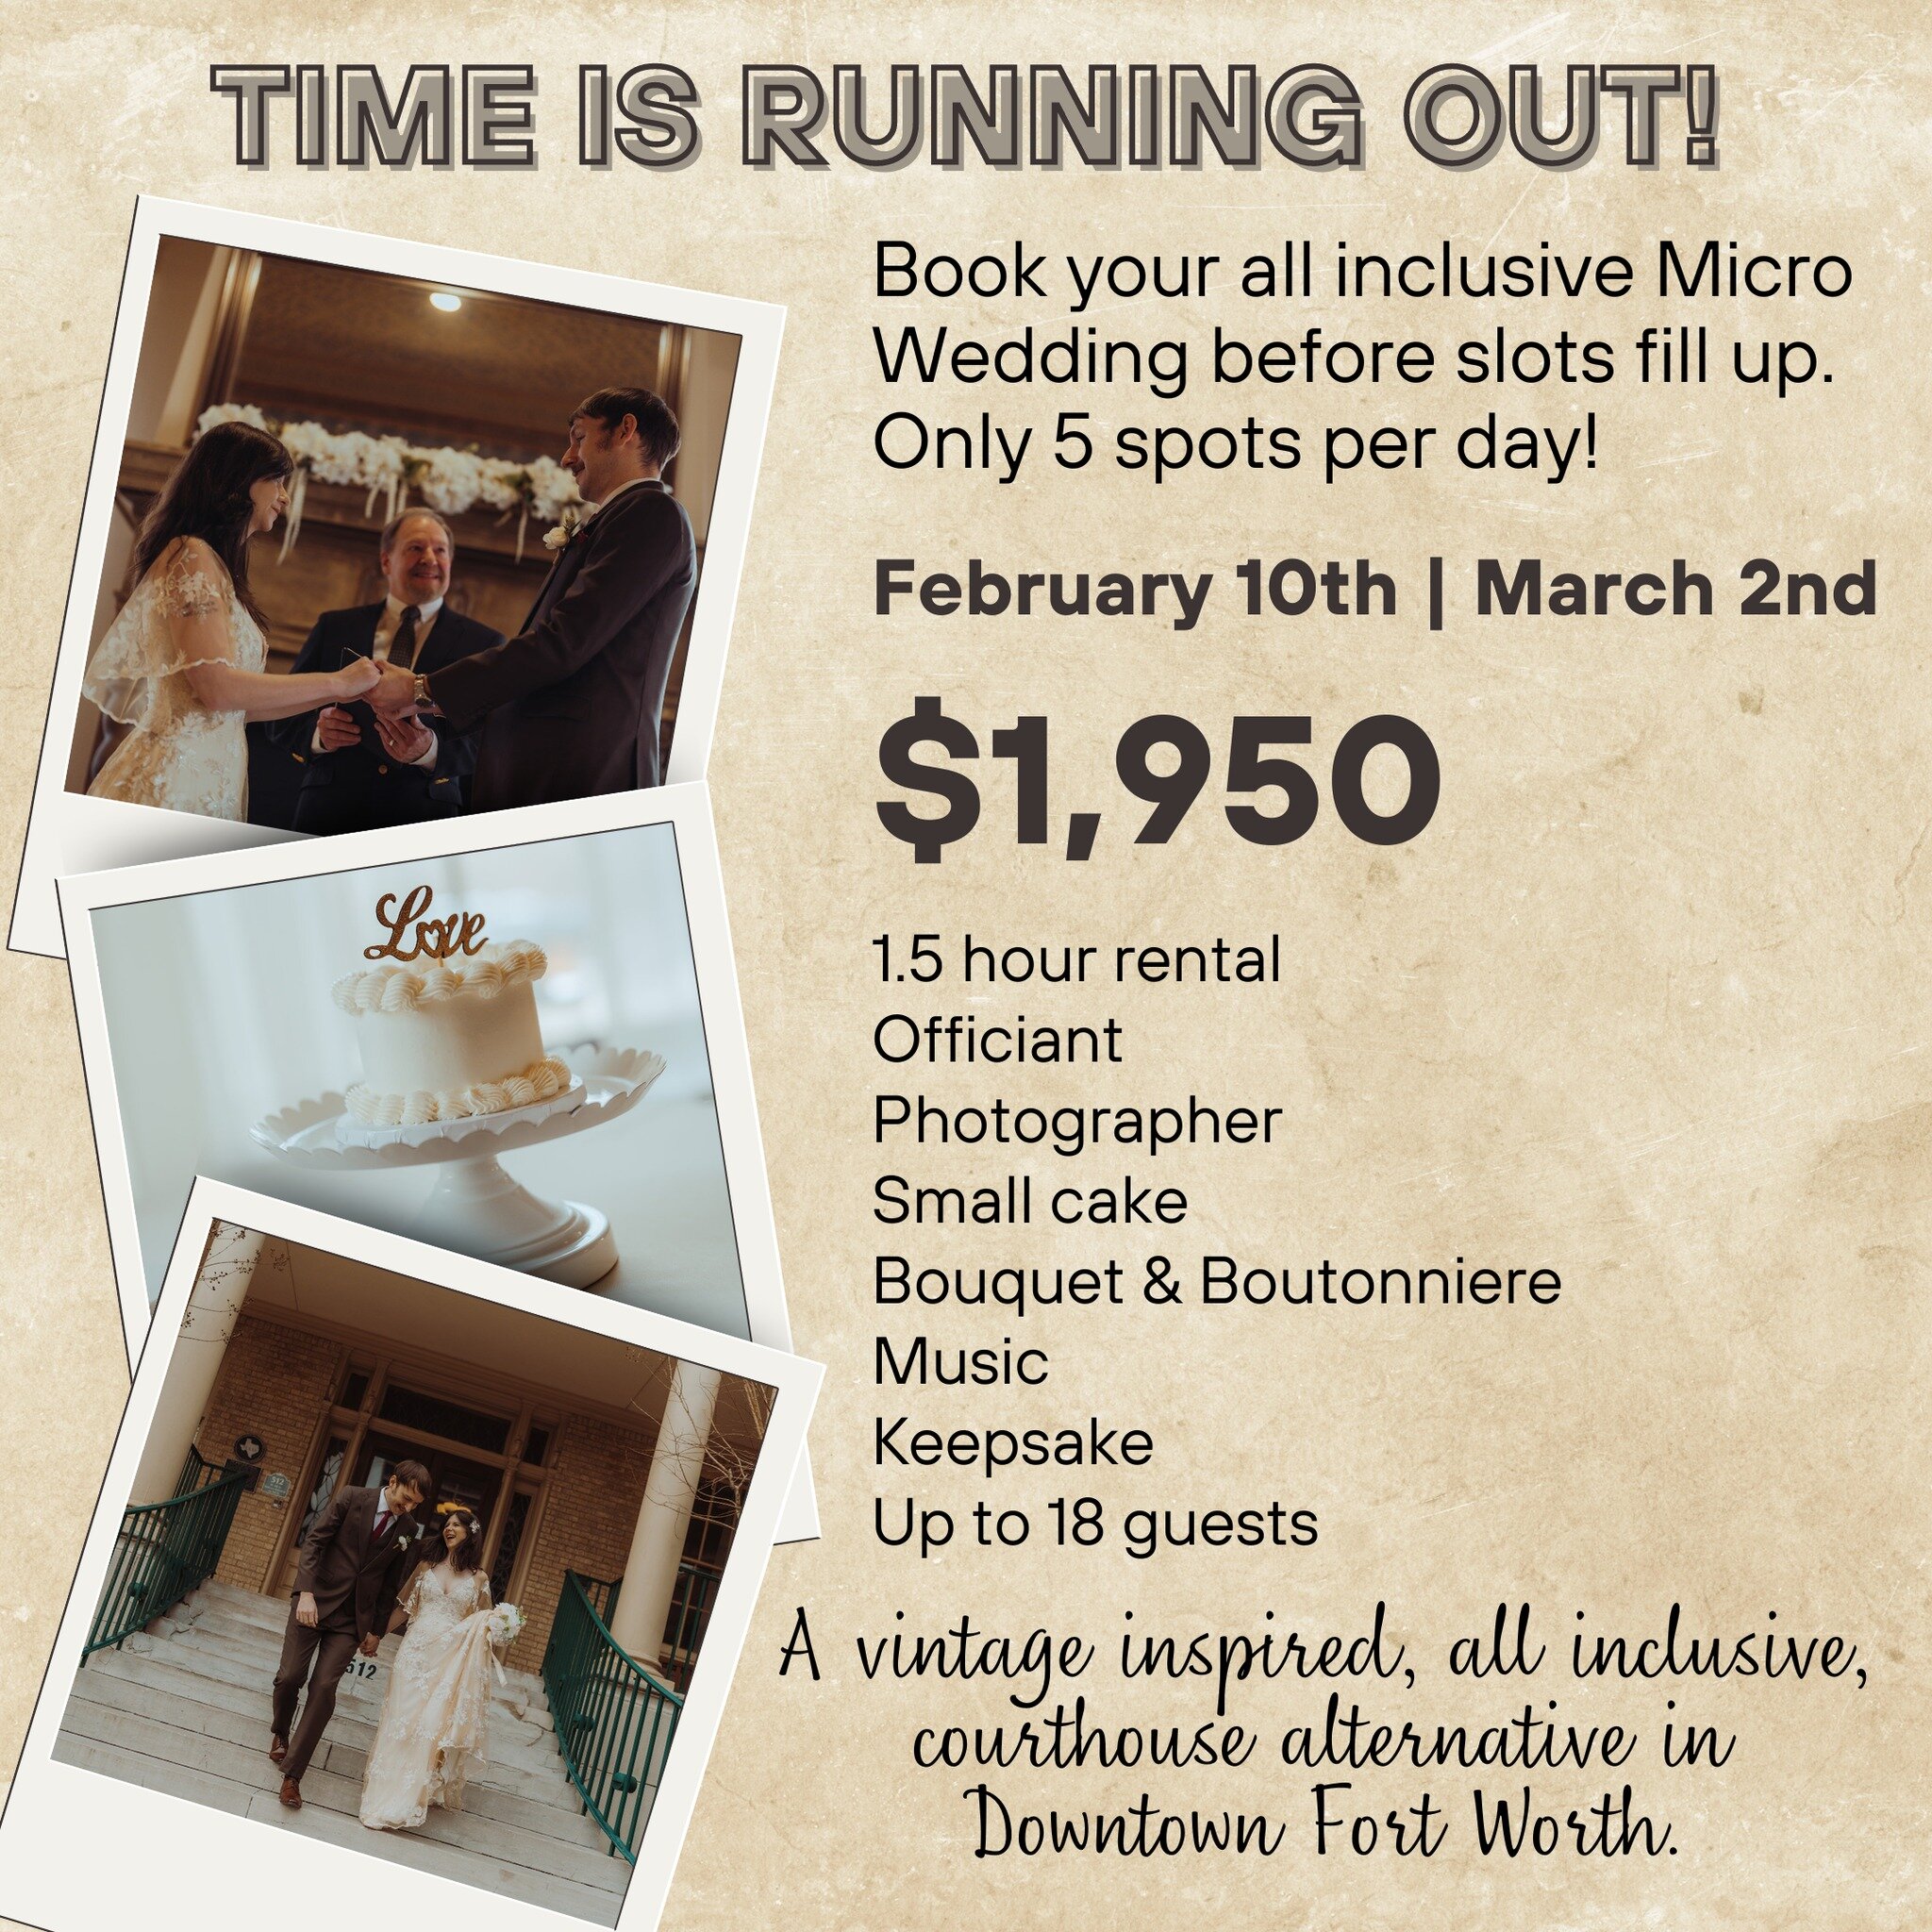 If you're on a tight budget but still want an absolutely stunning wedding, this deal is for you. We are offering all inclusive micro weddings at Historic 512! Visit our website for more information: https://www.historic512.com/micro-wedding